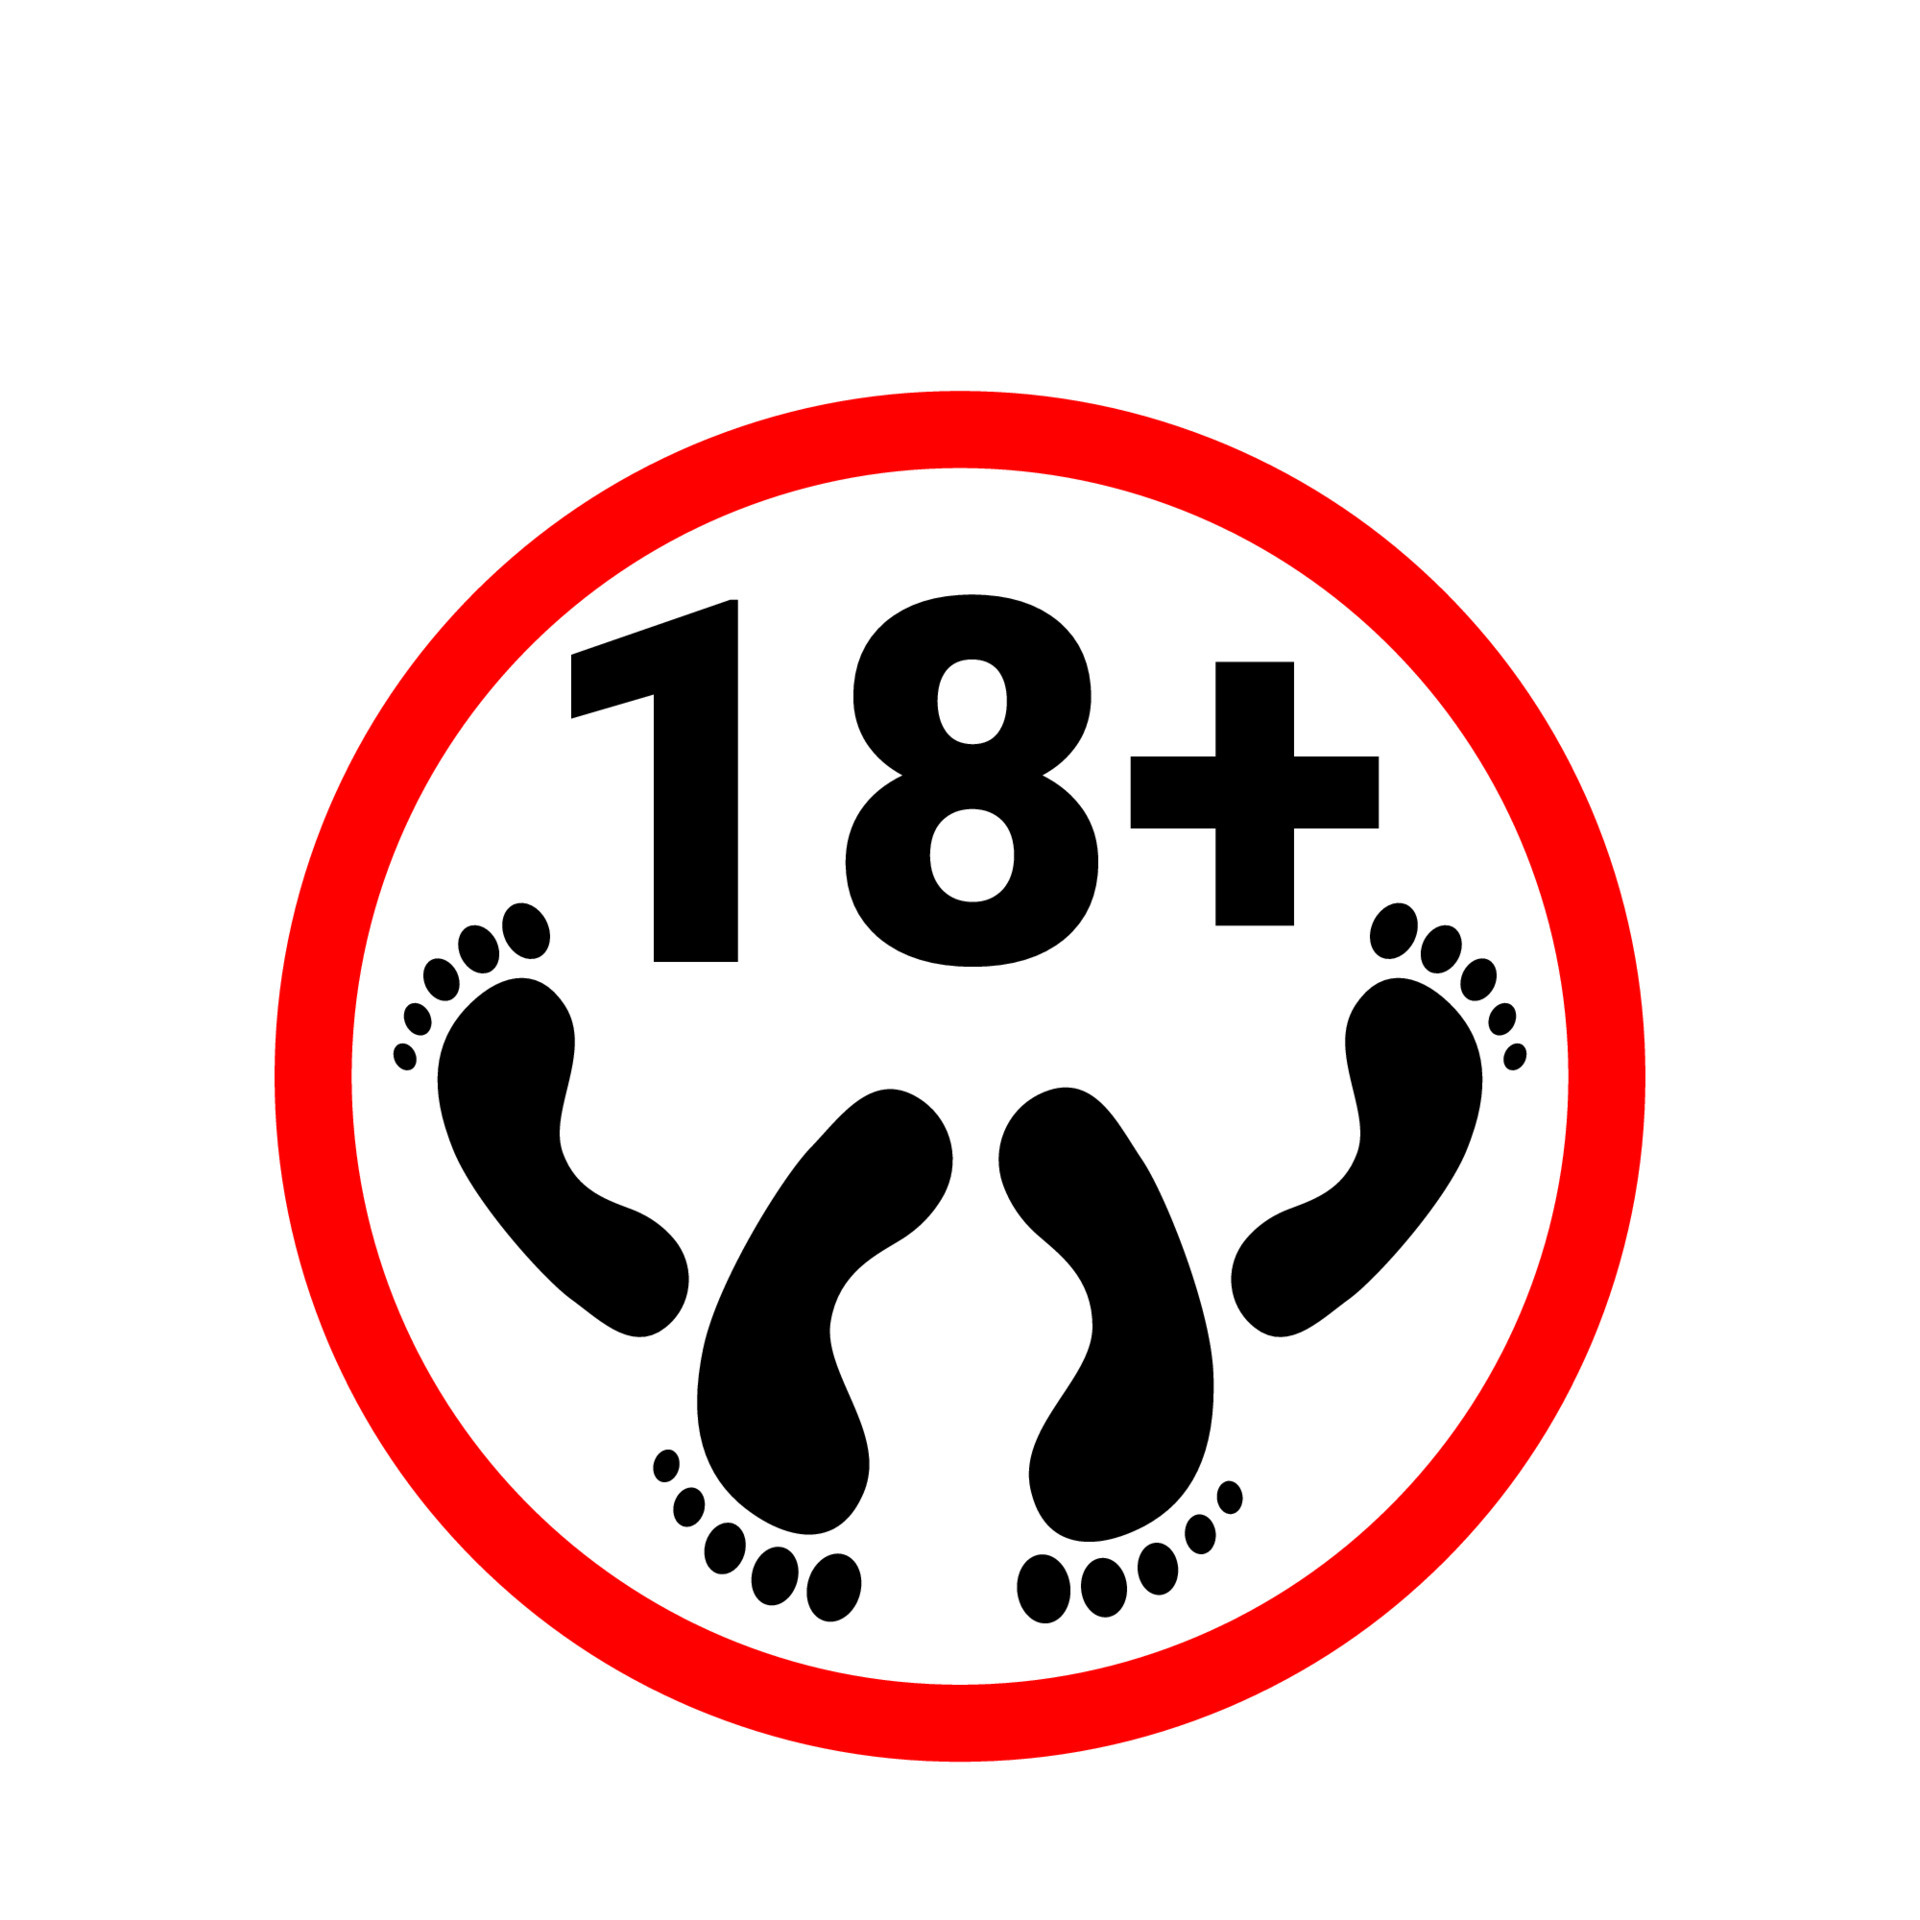 https://static.vecteezy.com/system/resources/previews/006/114/751/original/18-plus-icon-prohibition-sign-for-persons-under-eighteen-years-of-age-sex-content-for-adults-red-circle-with-numbers-18-plus-and-two-pairs-of-legs-icon-isolated-on-white-background-vector.jpg